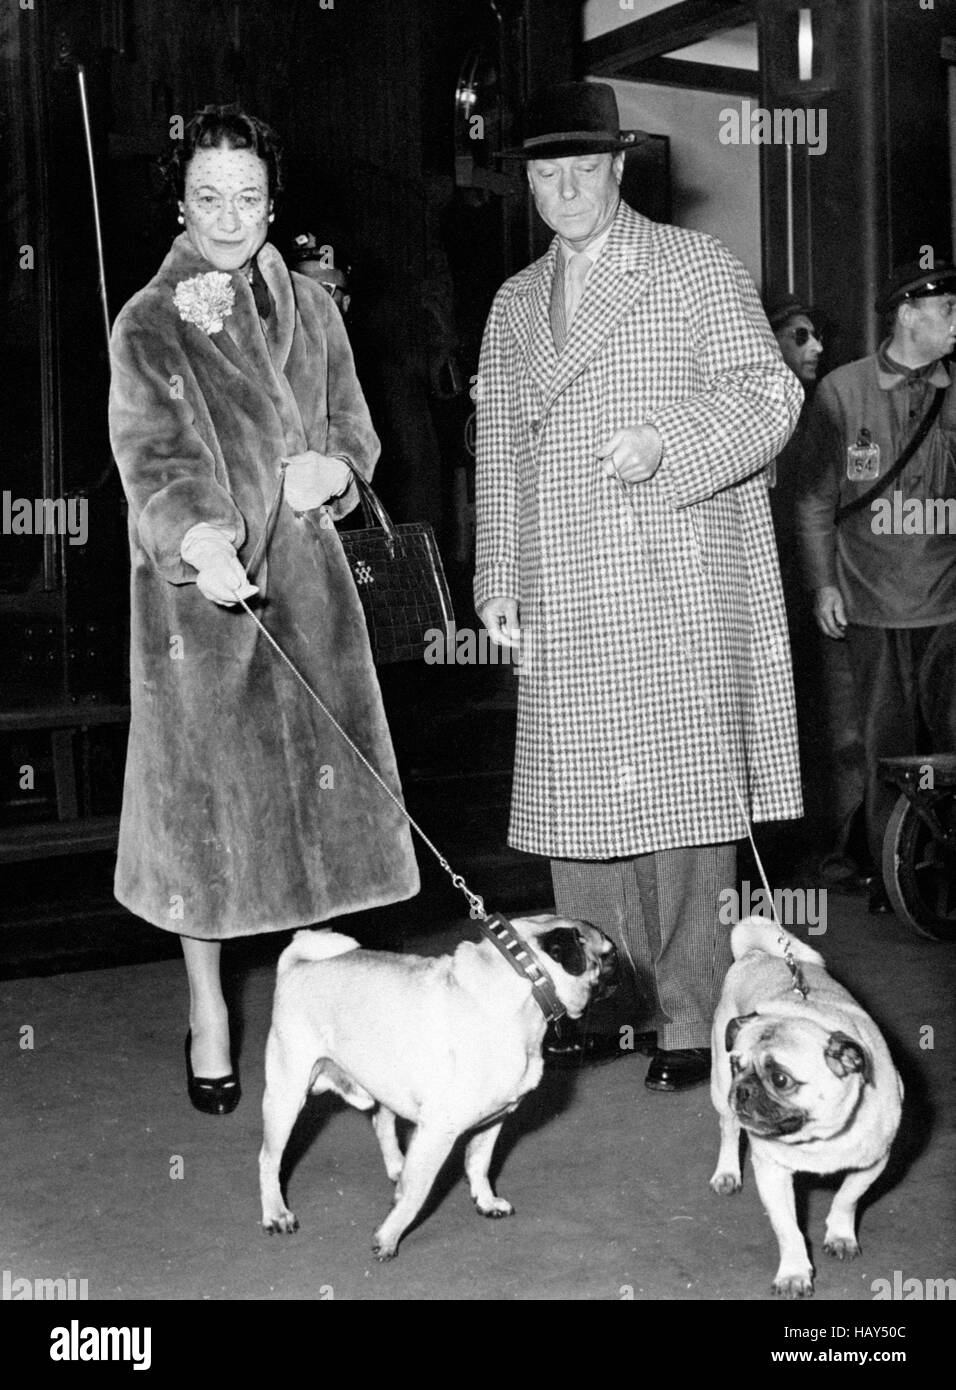 File photo dated 15/04/55 of King Edward VIII with his wife Wallis Simpson as they leave the train at the Gare St. Lazare, Paris, with their pet dogs, as historian Professor Richard Toye of Exeter University said that Edward VIII would have been a &quot;useless king&quot; had he stayed on the throne and his abdication saved the monarchy. Stock Photo